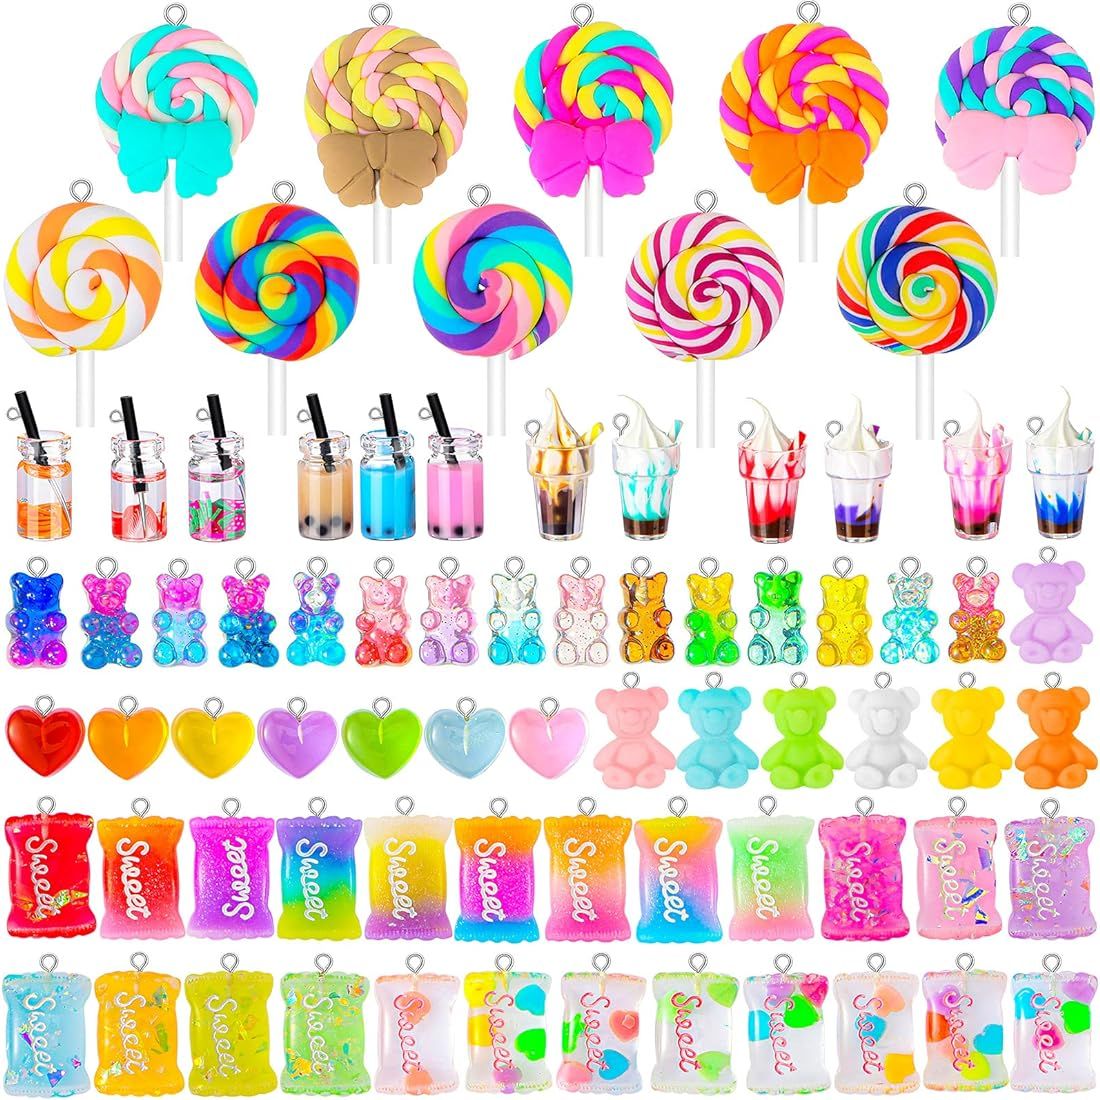 Yinkin 82 Pieces Candy Pendant Charm for Jewelry Making, Includes 24 Resin Candy Pendant, 22 DIY ... | Amazon (US)